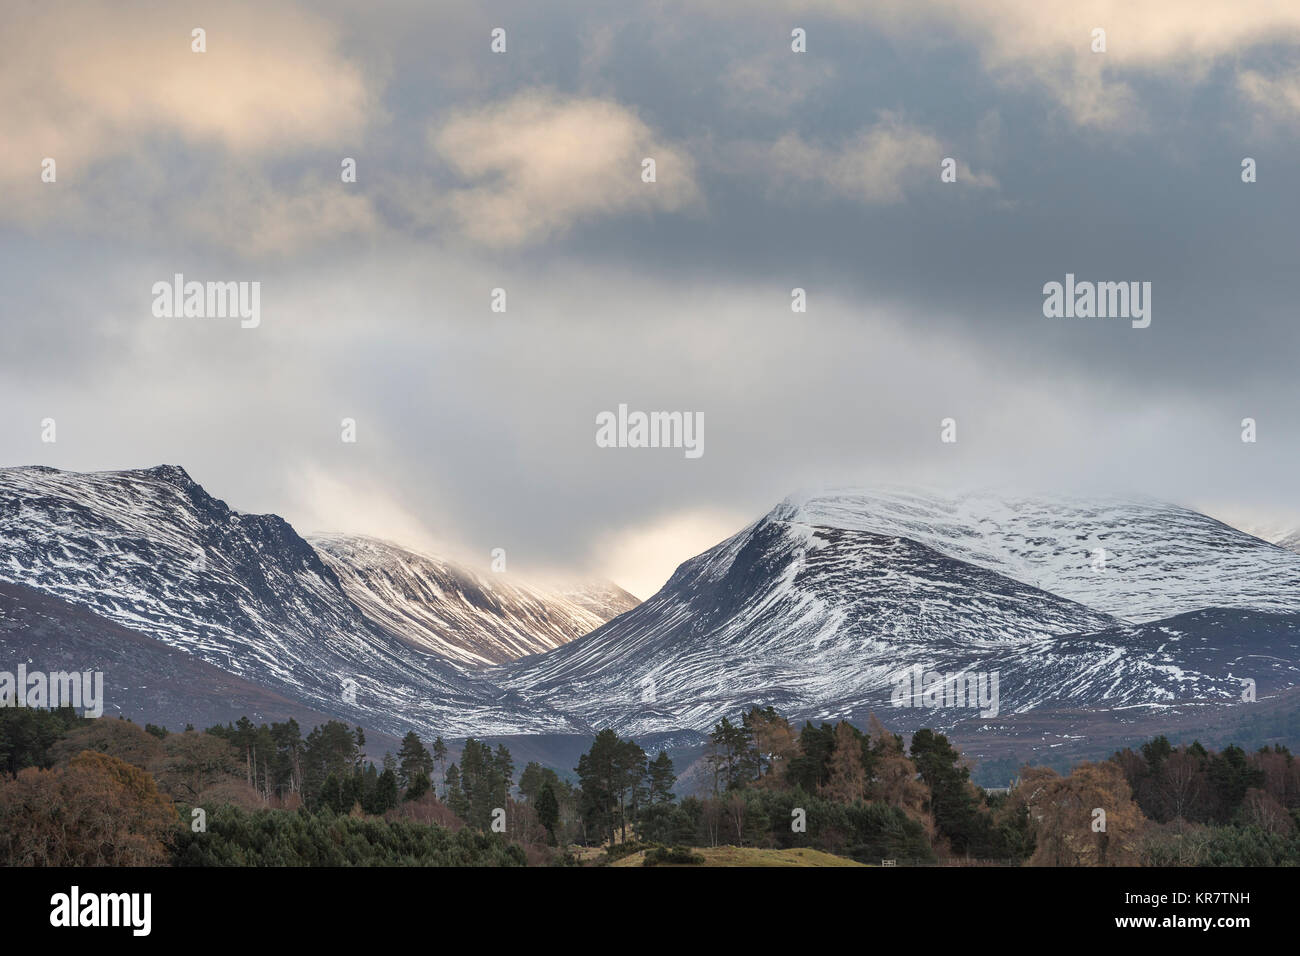 Lairig Ghru Mountain Pass in the Cairngorms National Park in Scotland. Stock Photo